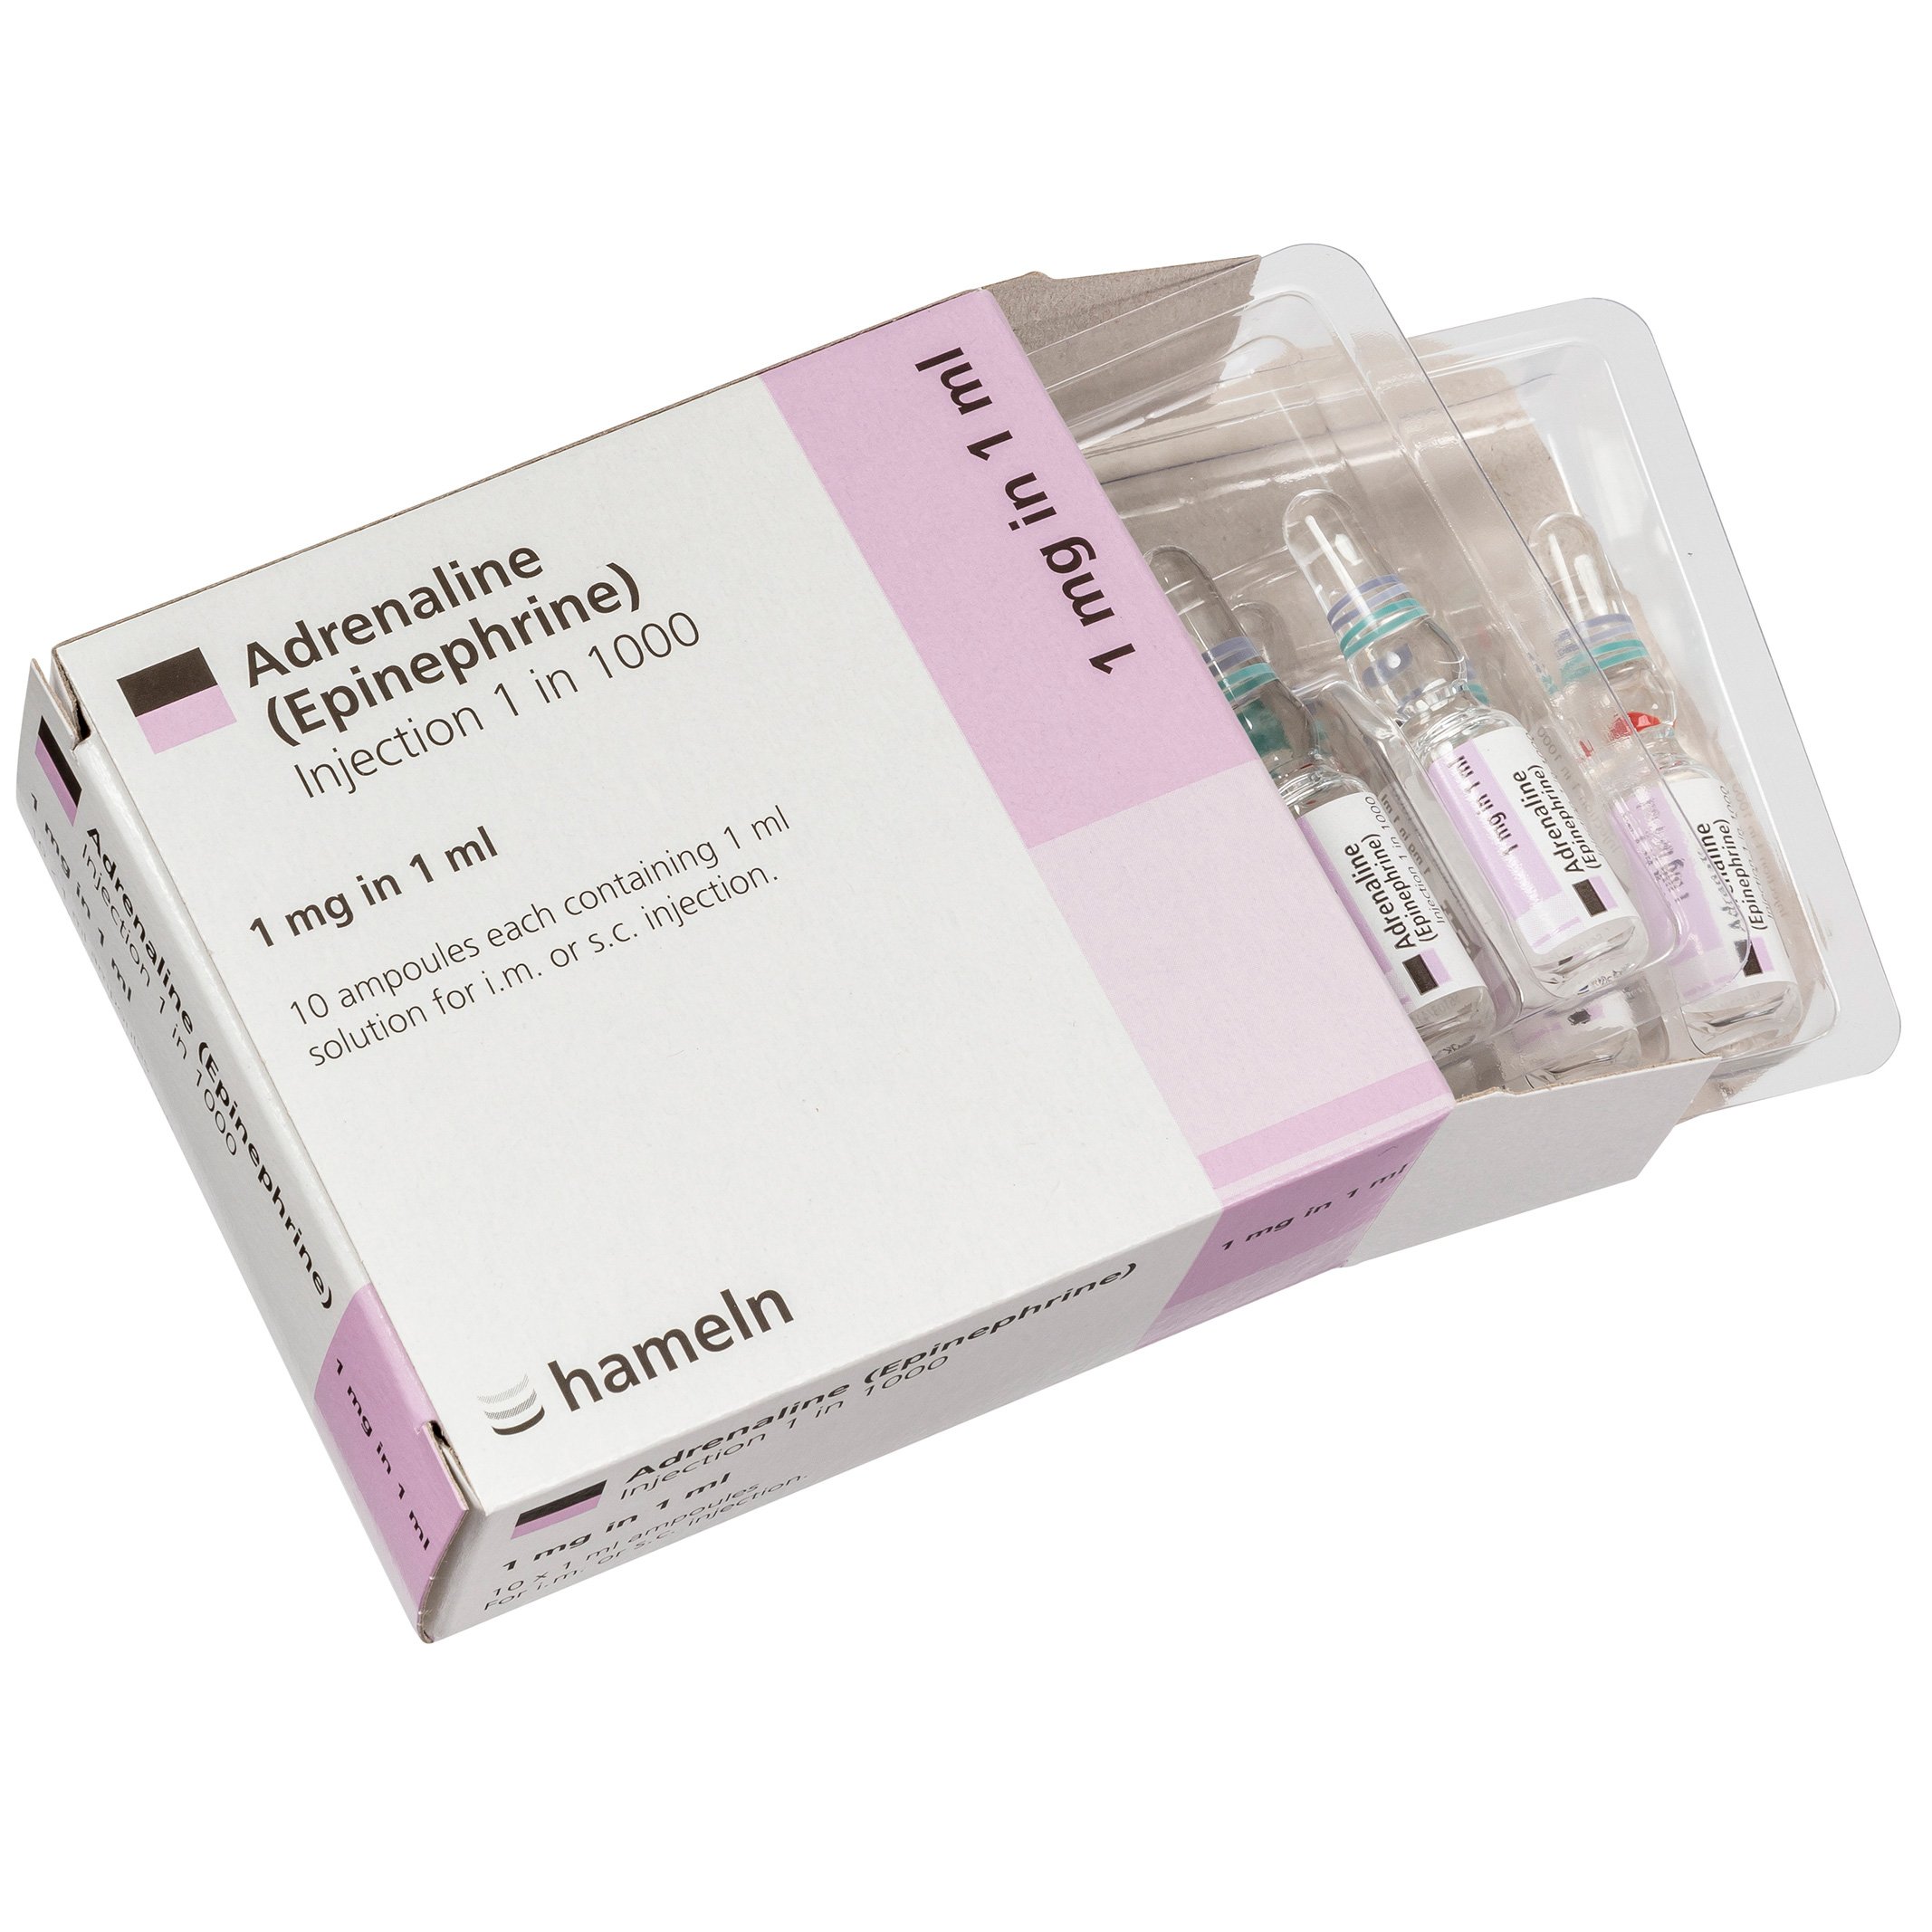 Adrenaline 1:1000 - 1mg in 1ml Ampoules 